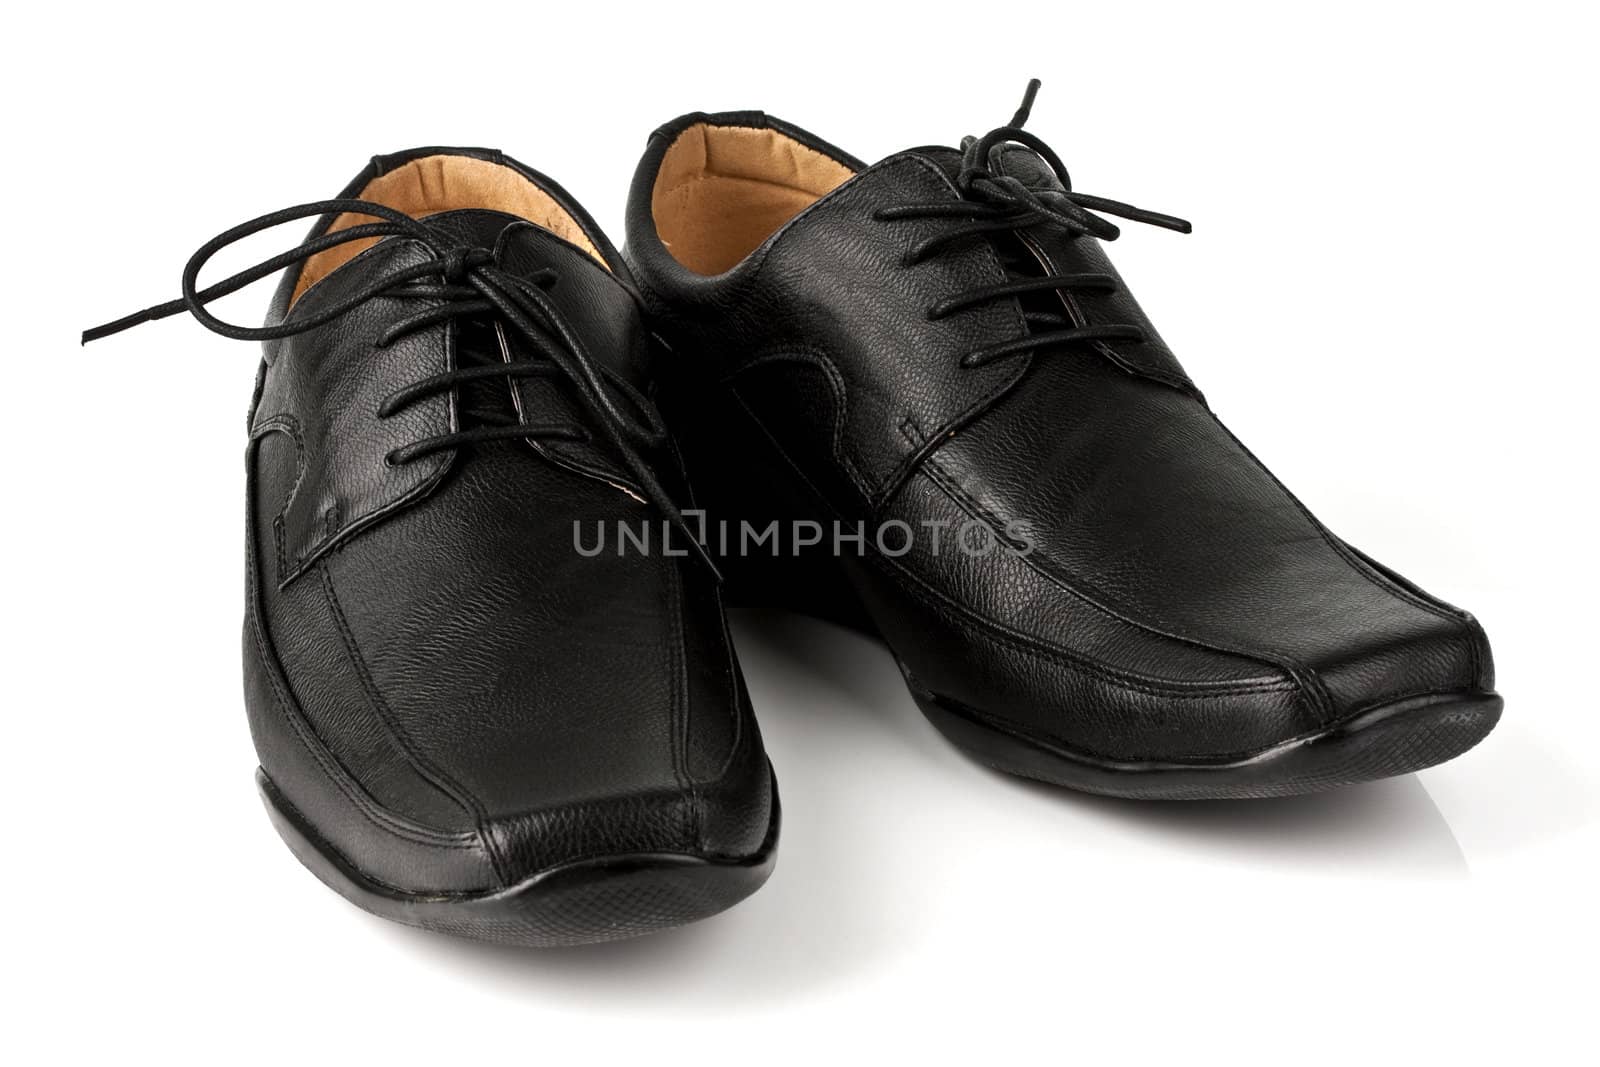 Classic elegant business shoes for men by posterize